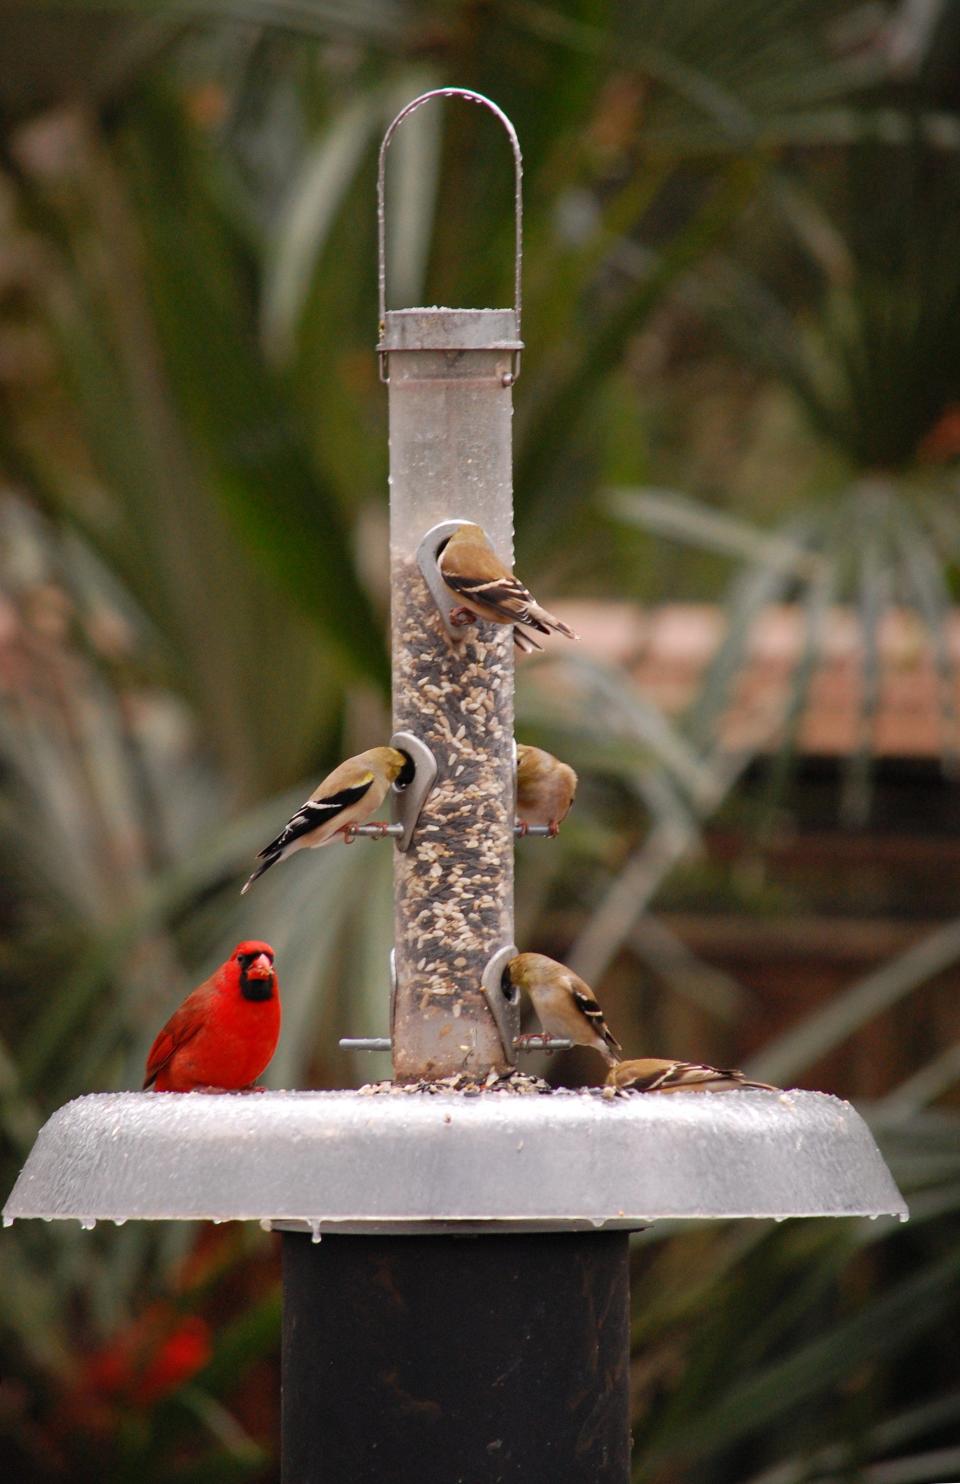 Goldfinches and cardinals love a blend of black oil sunflower, sunflower hearts, and safflower dispensed in a squirrel-proofed tube feeder.